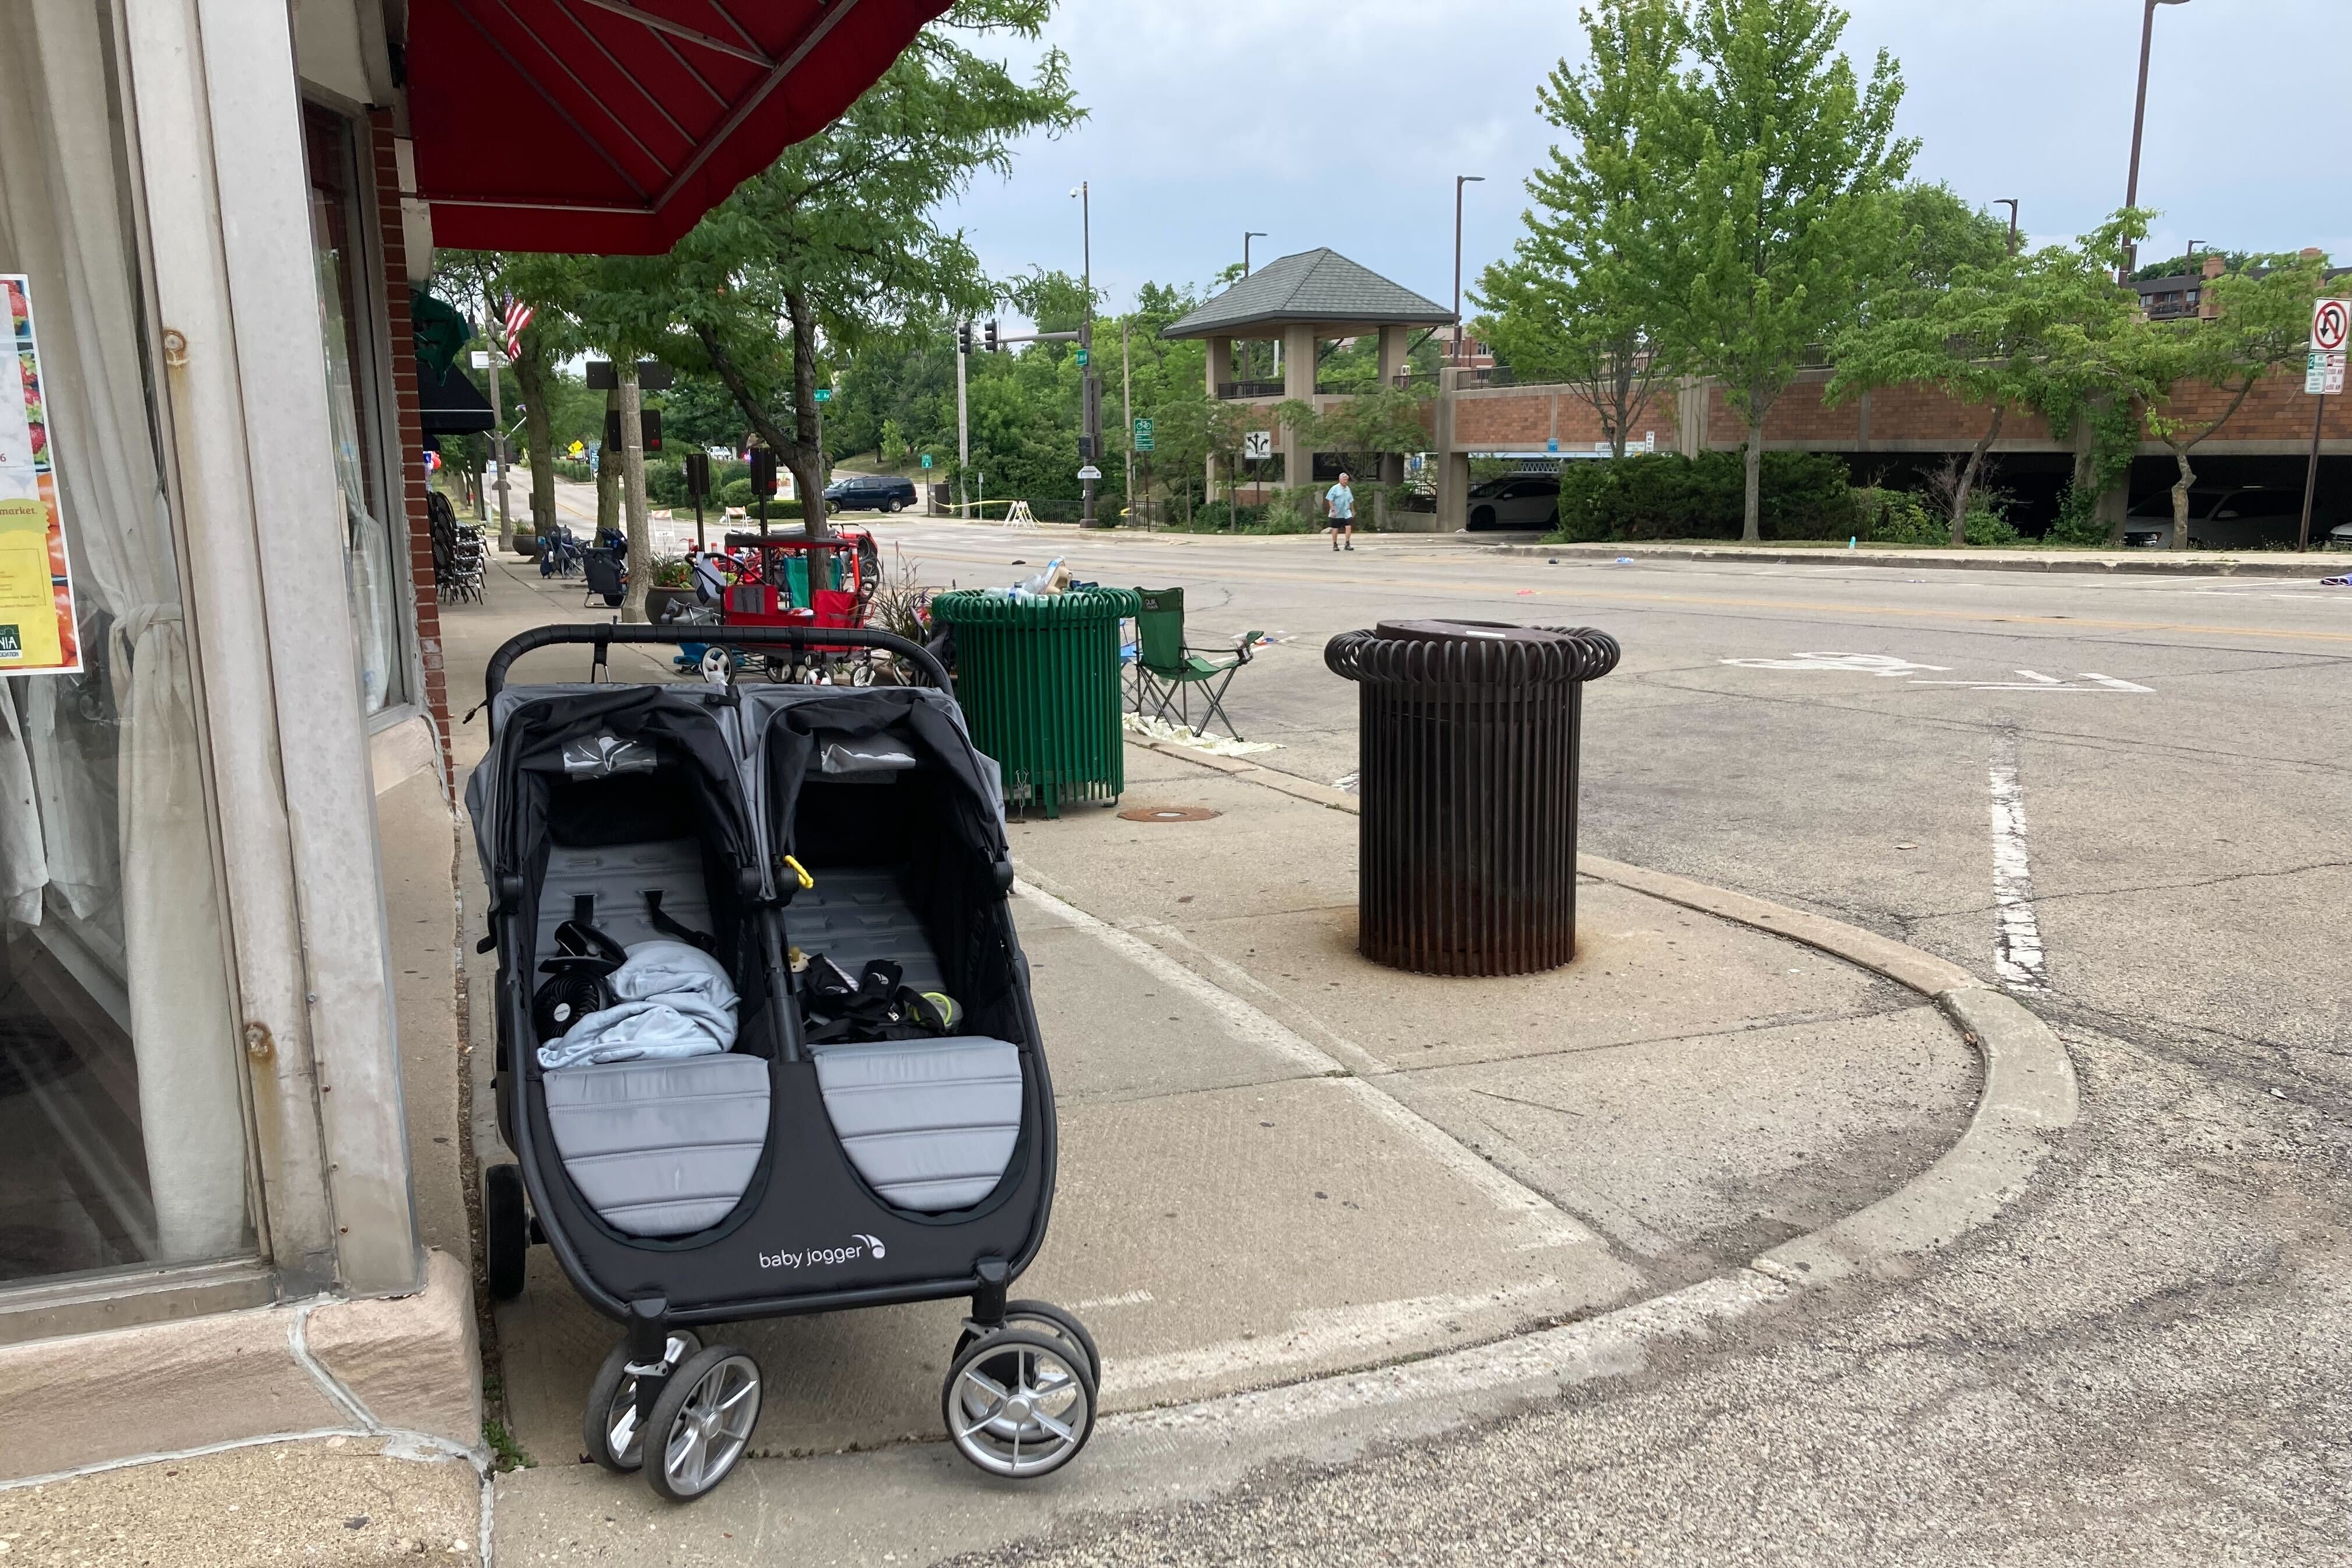 A double stroller sitting at an empty corner.